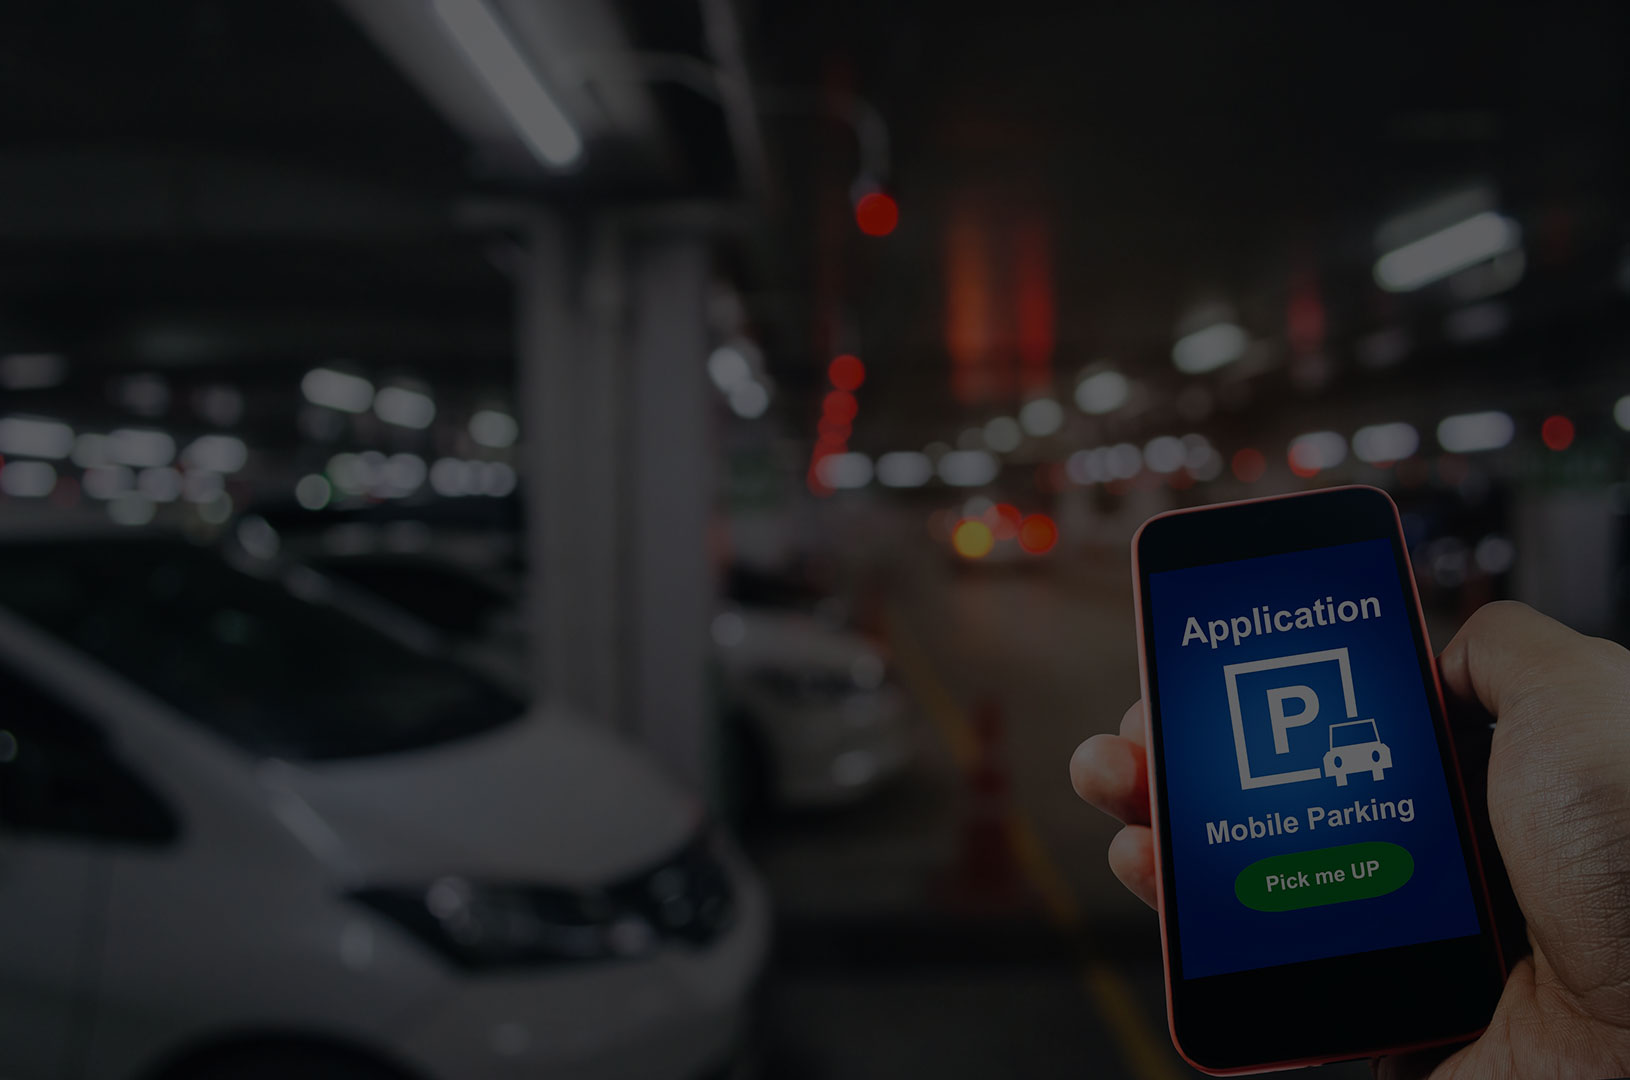 The Design and Development of an iBeacon based parking App